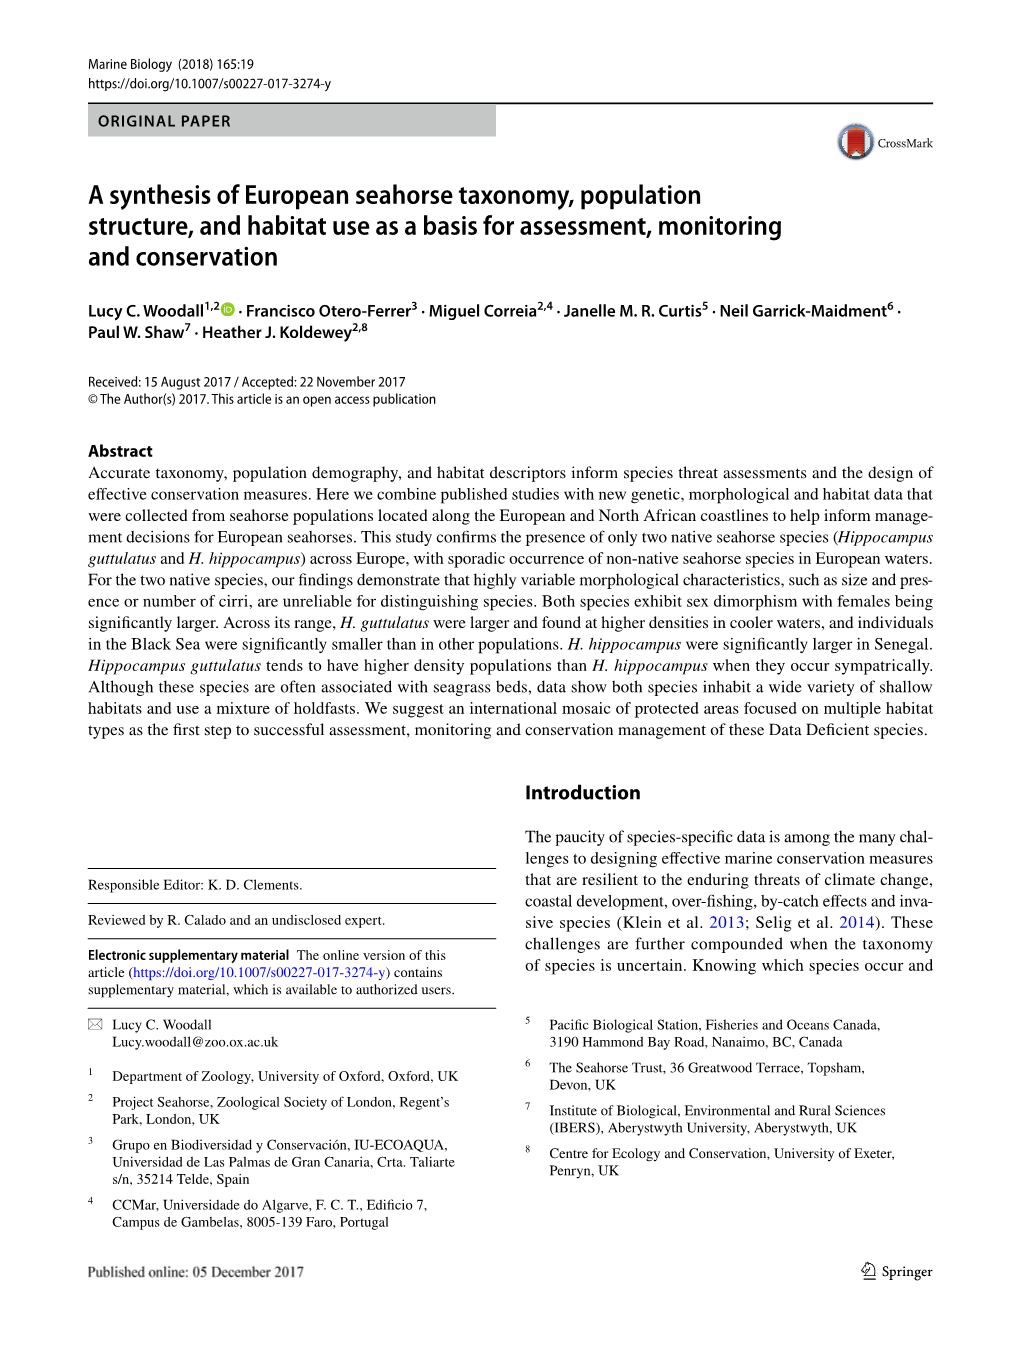 European Seahorse Taxonomy, Population Structure, and Habitat Use As a Basis for Assessment, Monitoring and Conservation